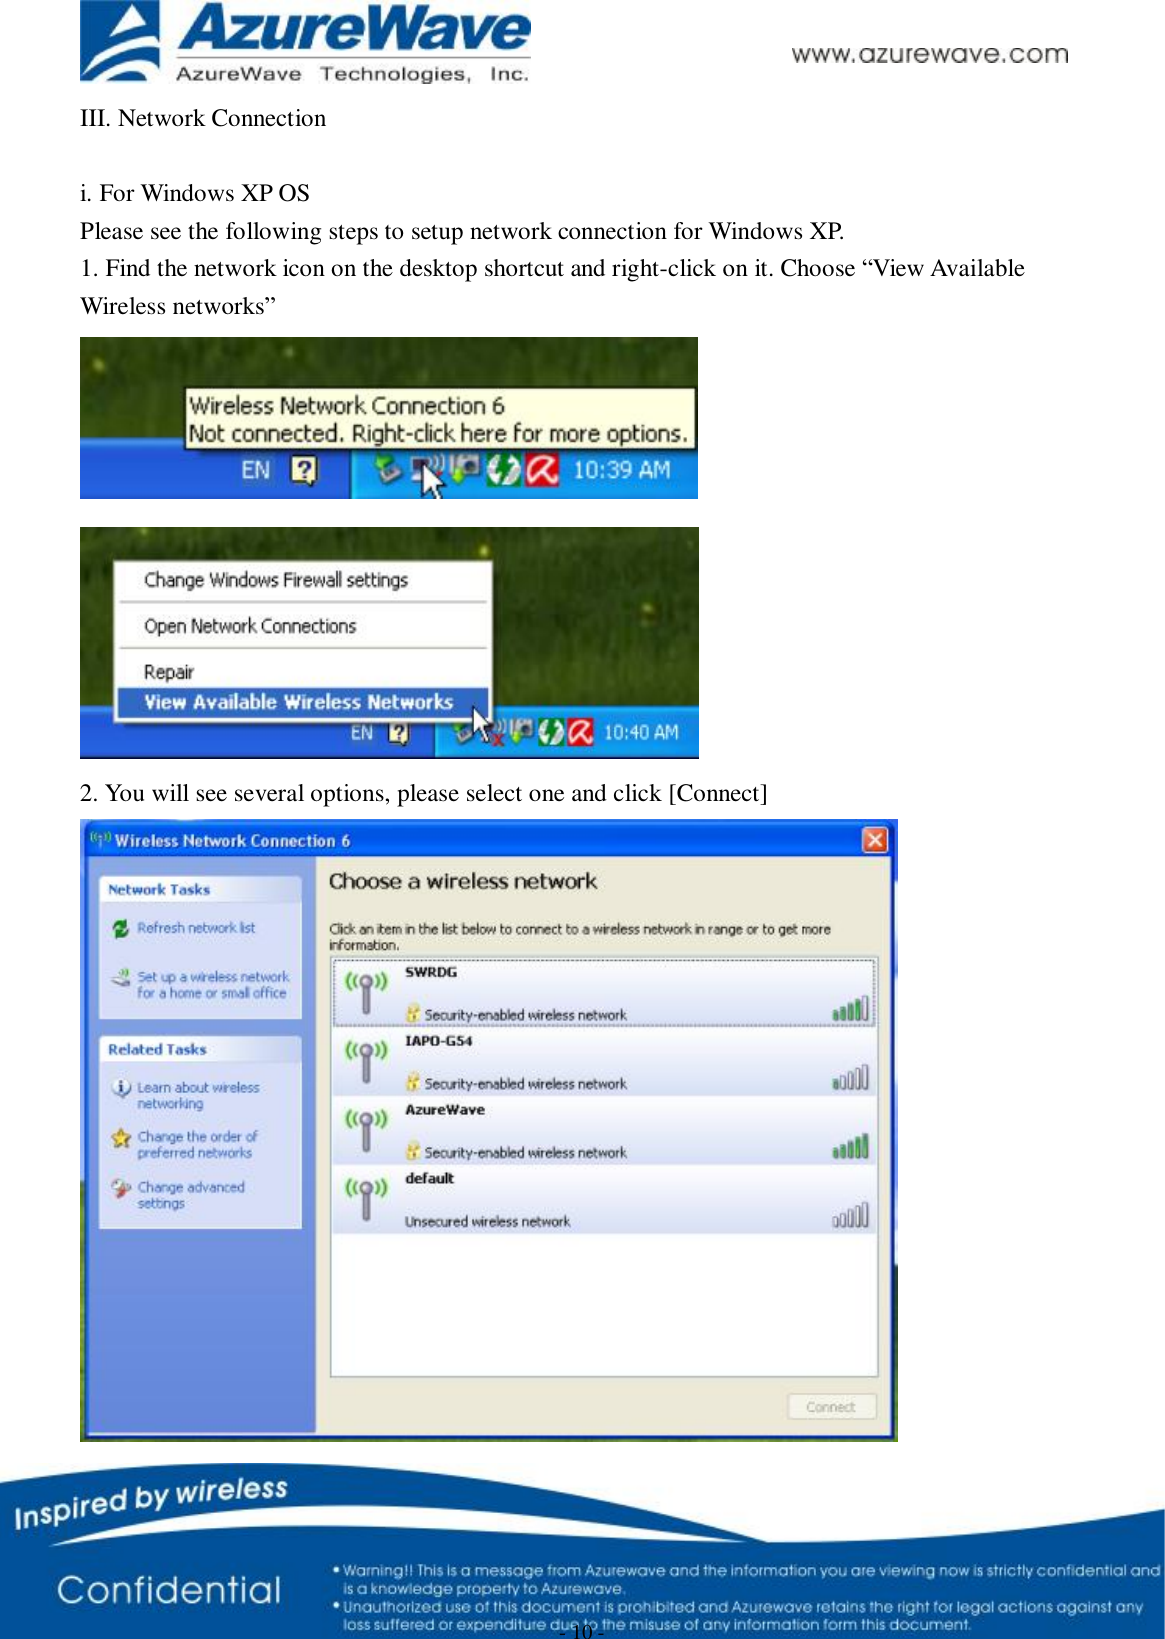      - 10 - III. Network Connection  i. For Windows XP OS Please see the following steps to setup network connection for Windows XP. 1. Find the network icon on the desktop shortcut and right-click on it. Choose “View Available Wireless networks”   2. You will see several options, please select one and click [Connect]  